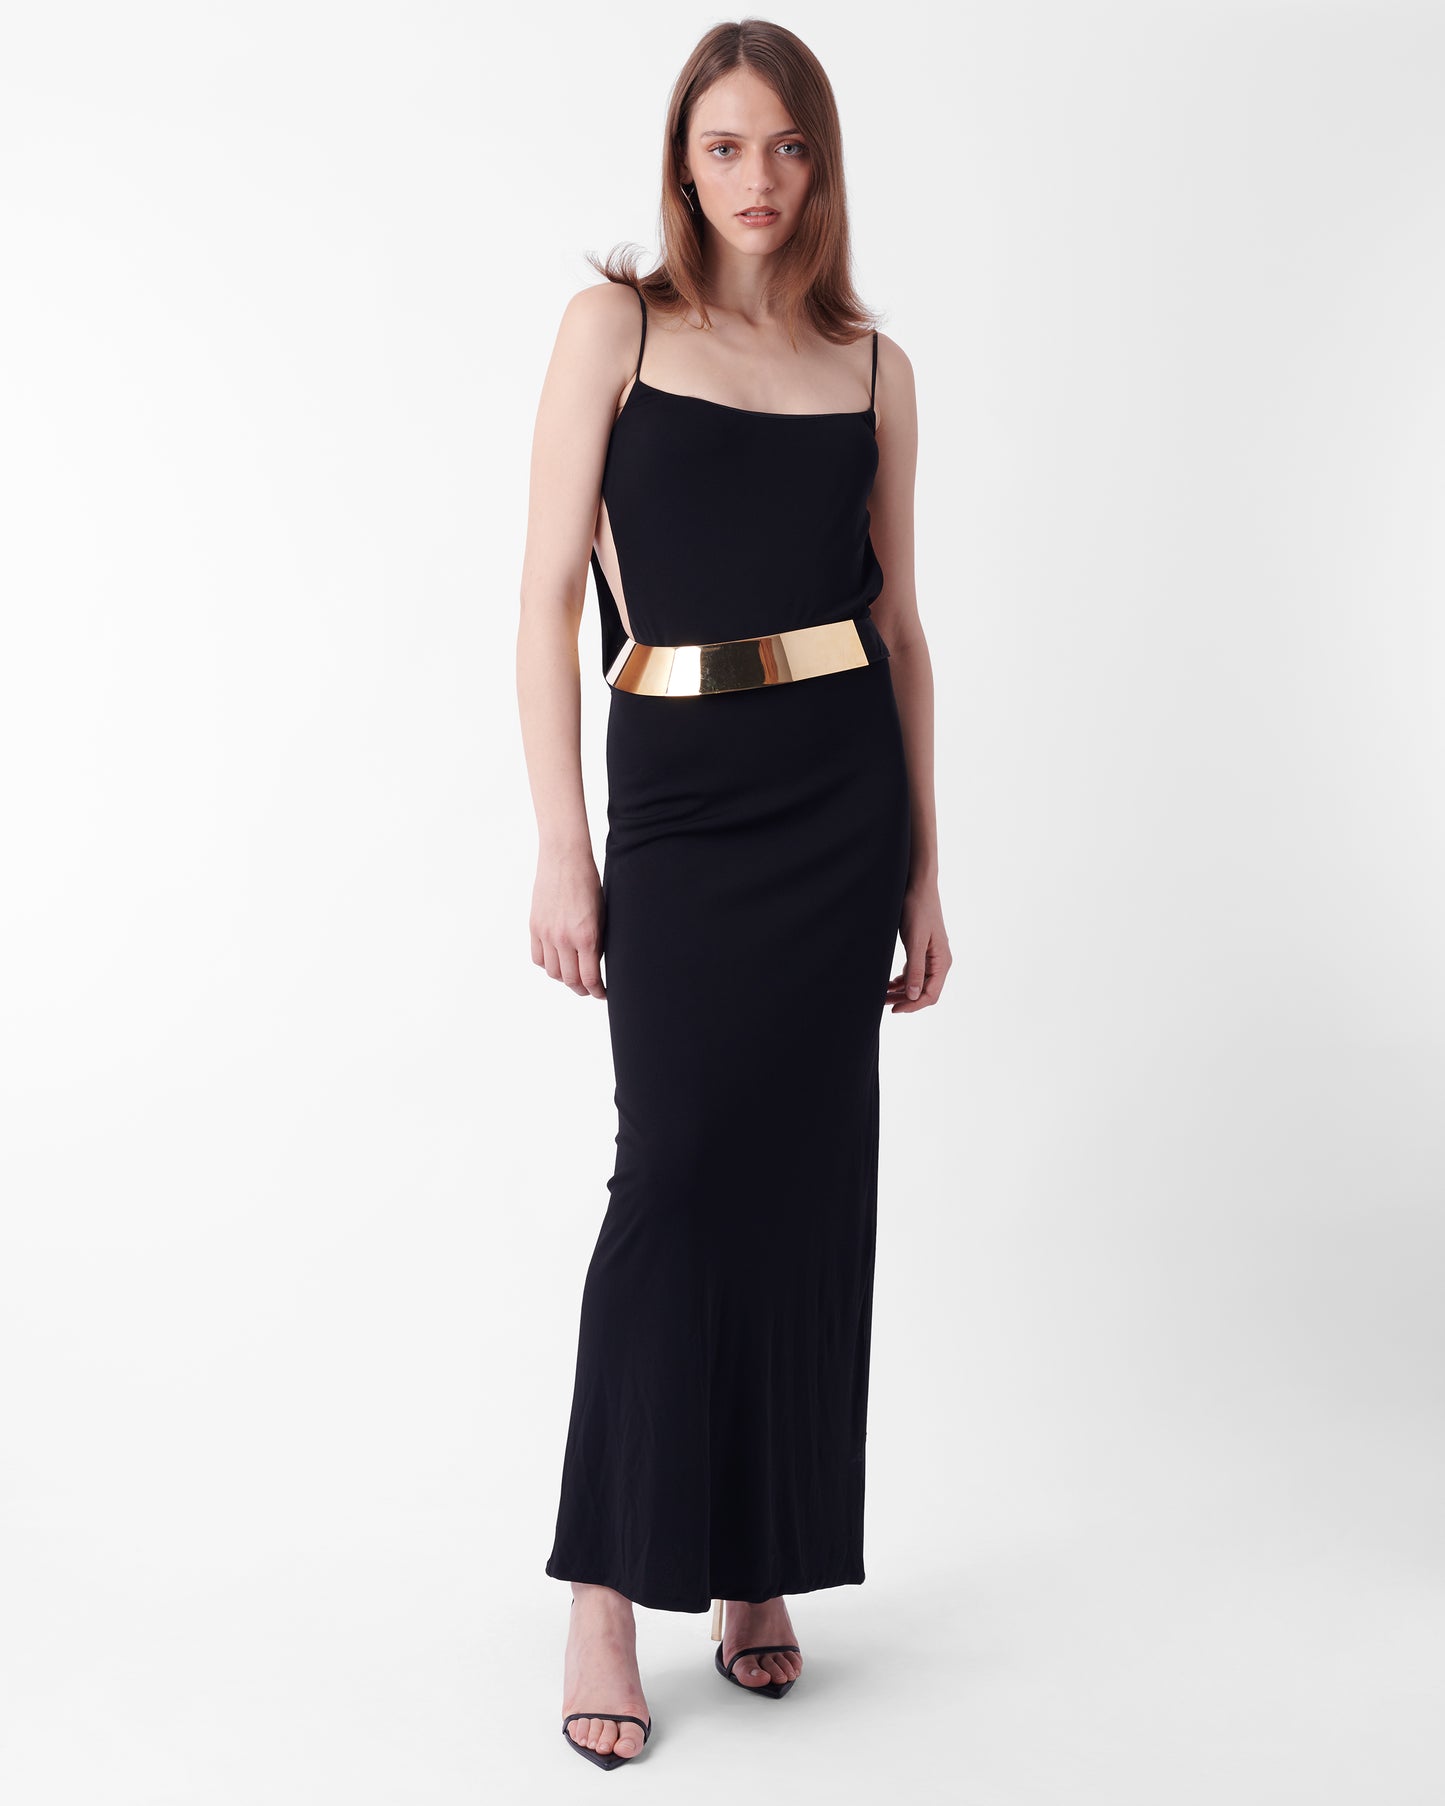 Vintage FW 1996 Runway Black Maxi Strappy Dress With Gold Belt